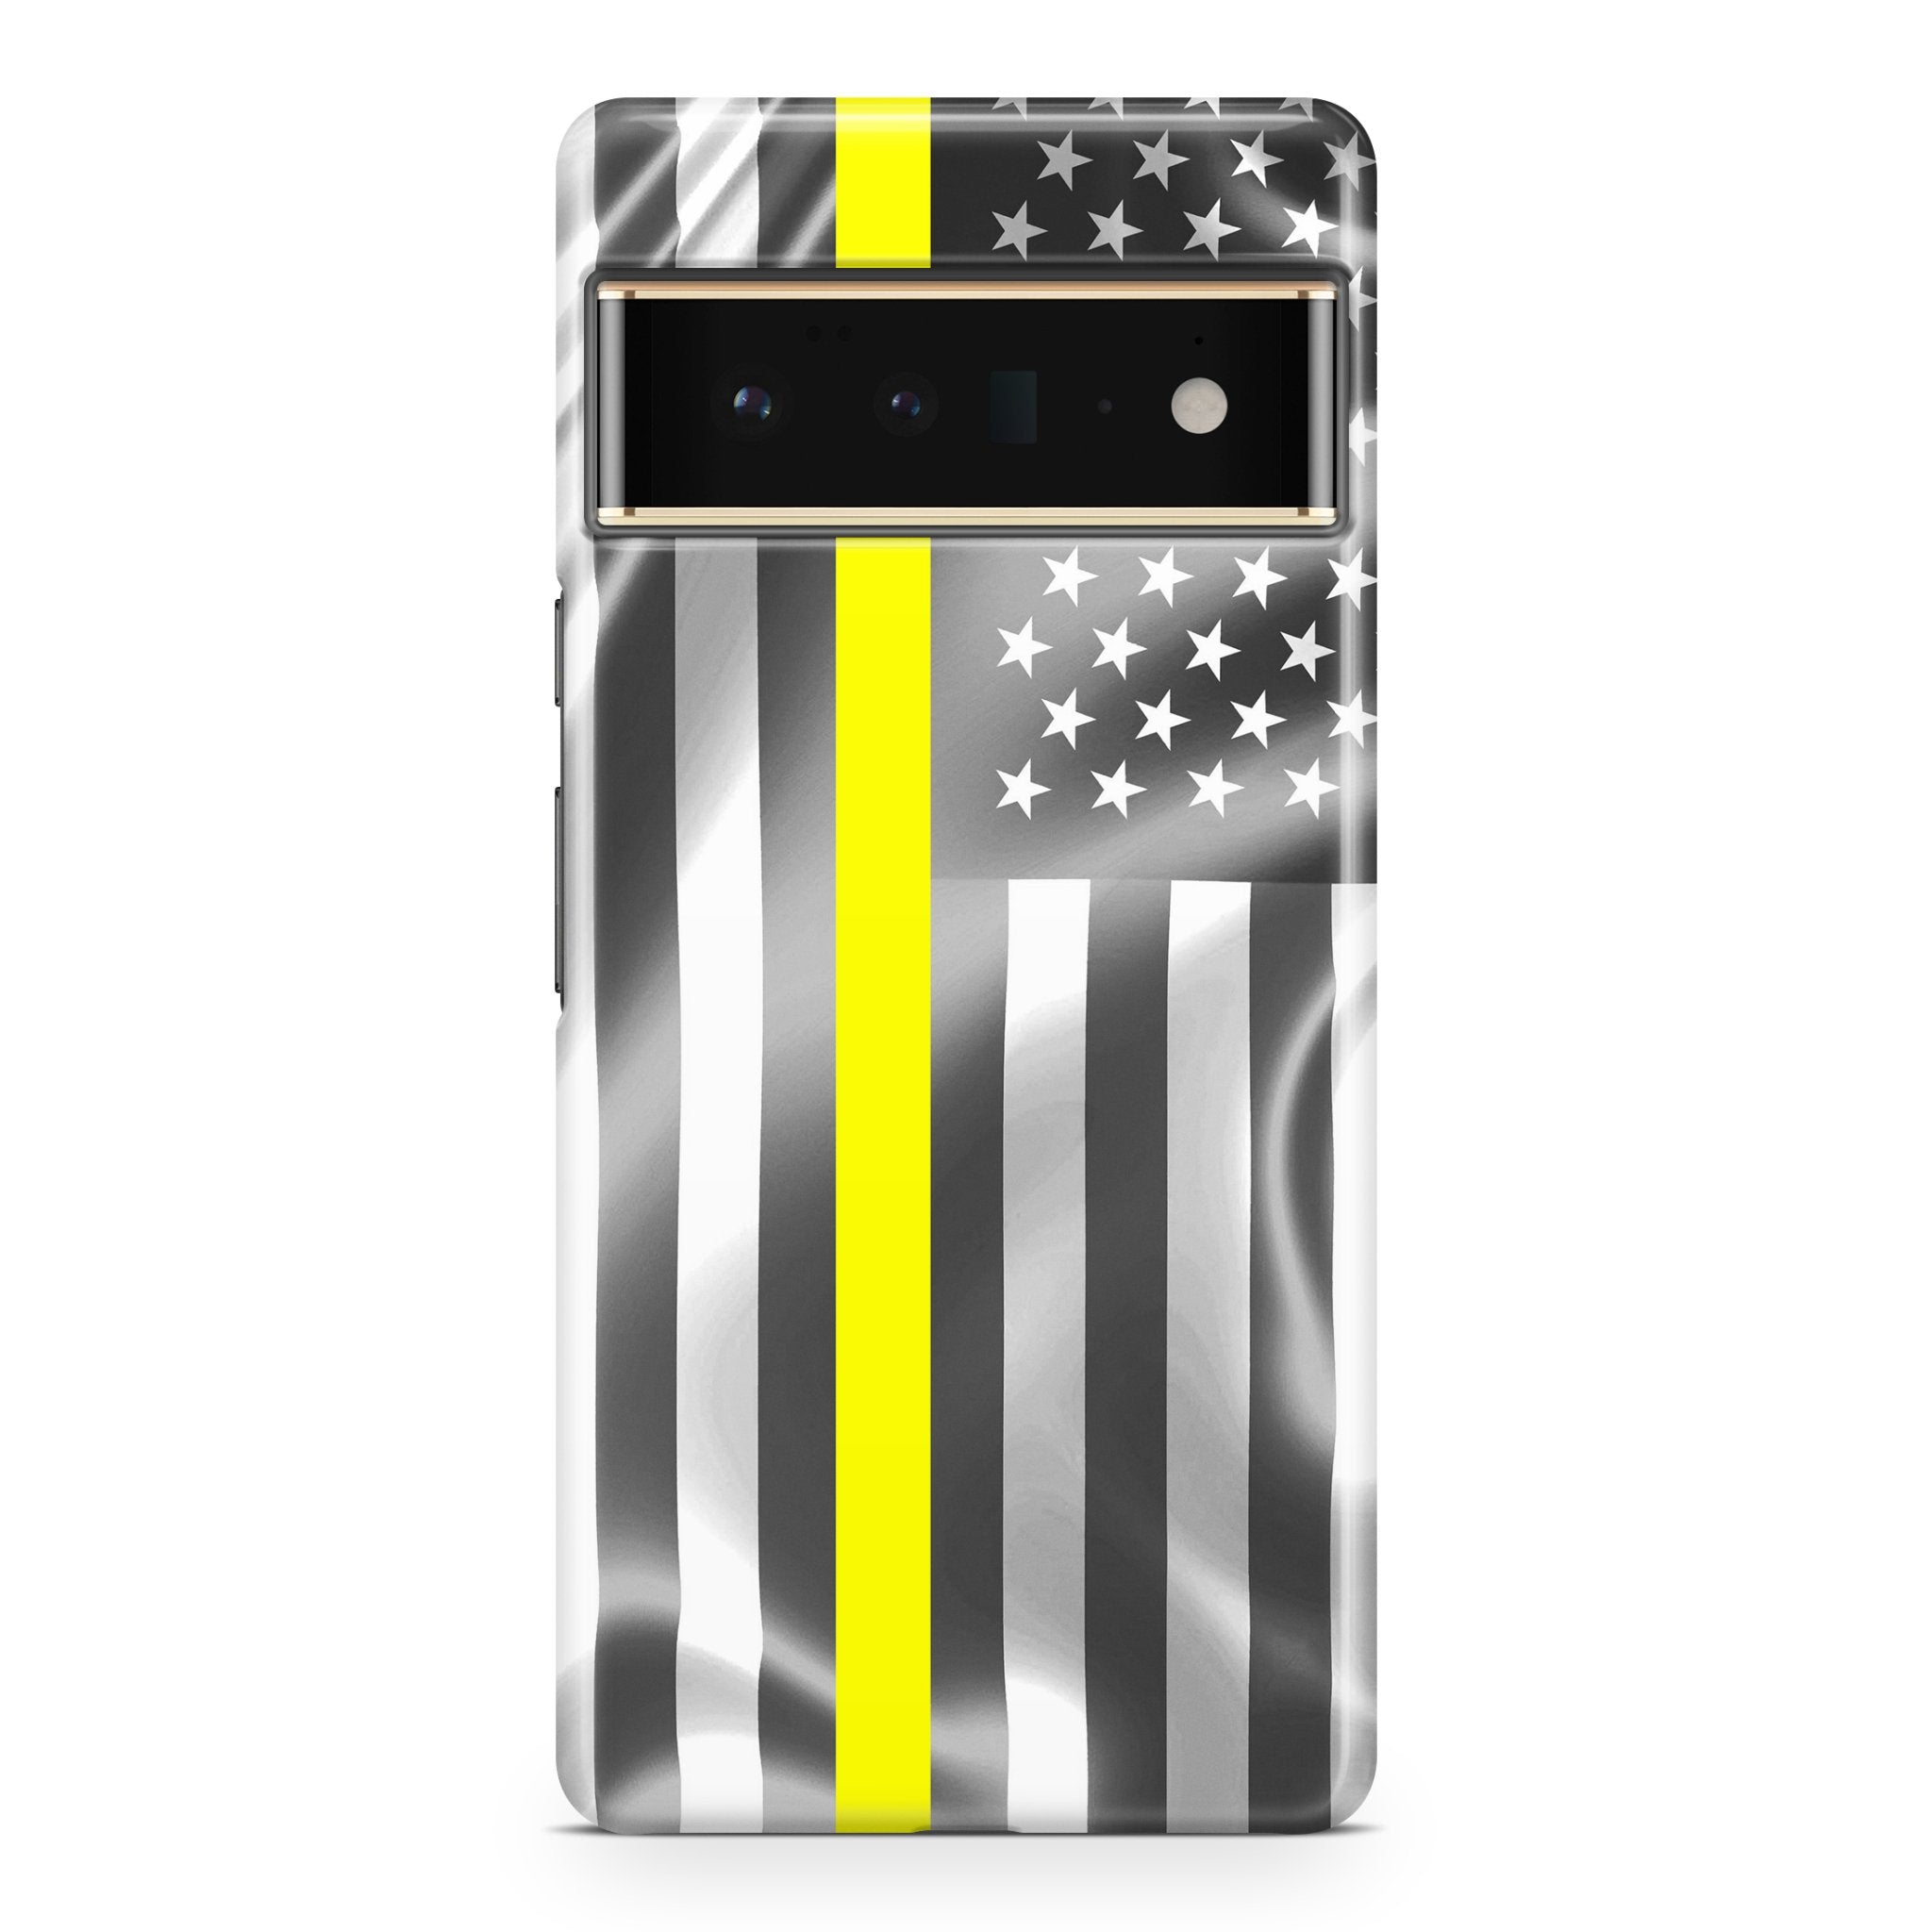 Thin Yellow Line - Google phone case designs by CaseSwagger